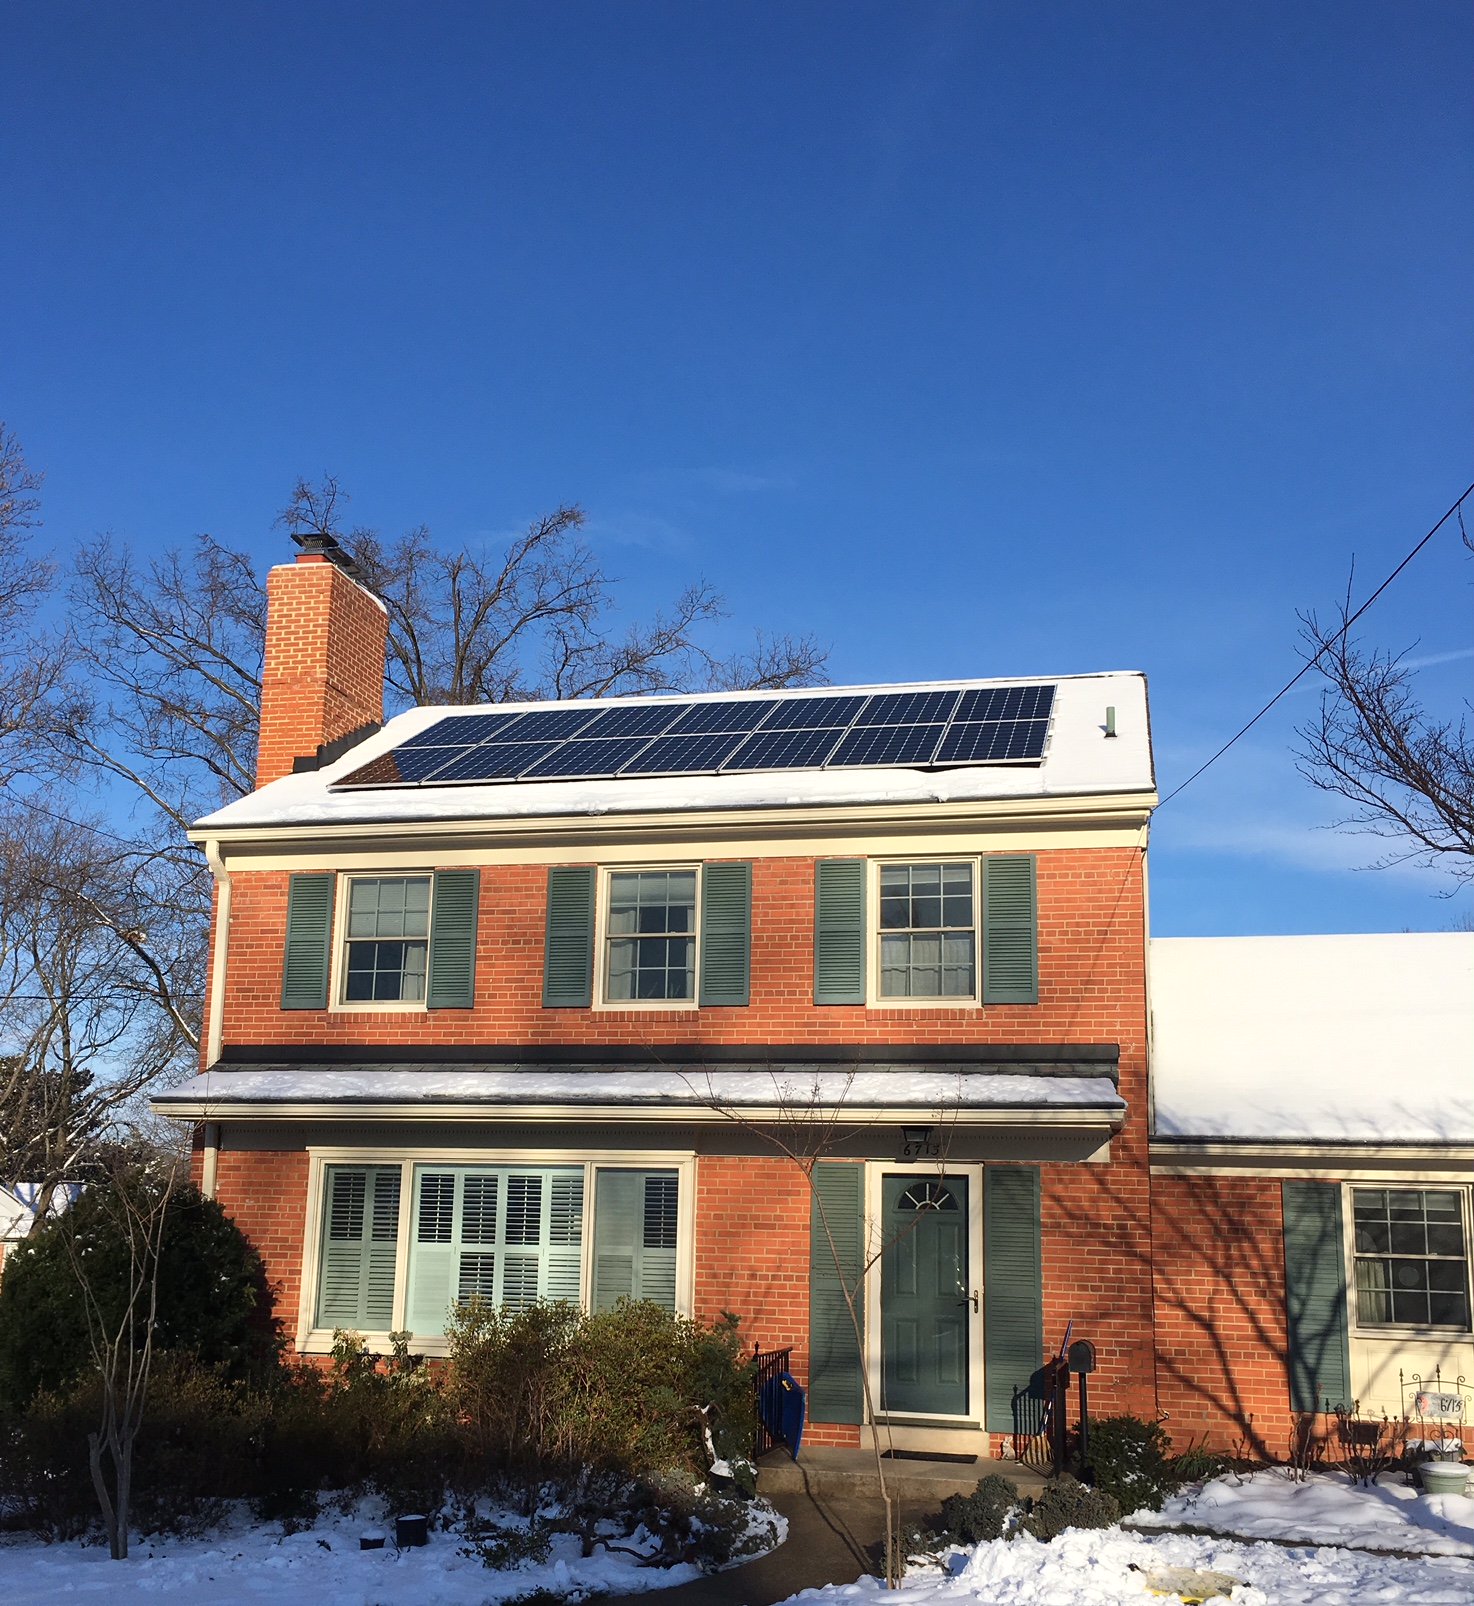 Cute home with solar panels in the snow